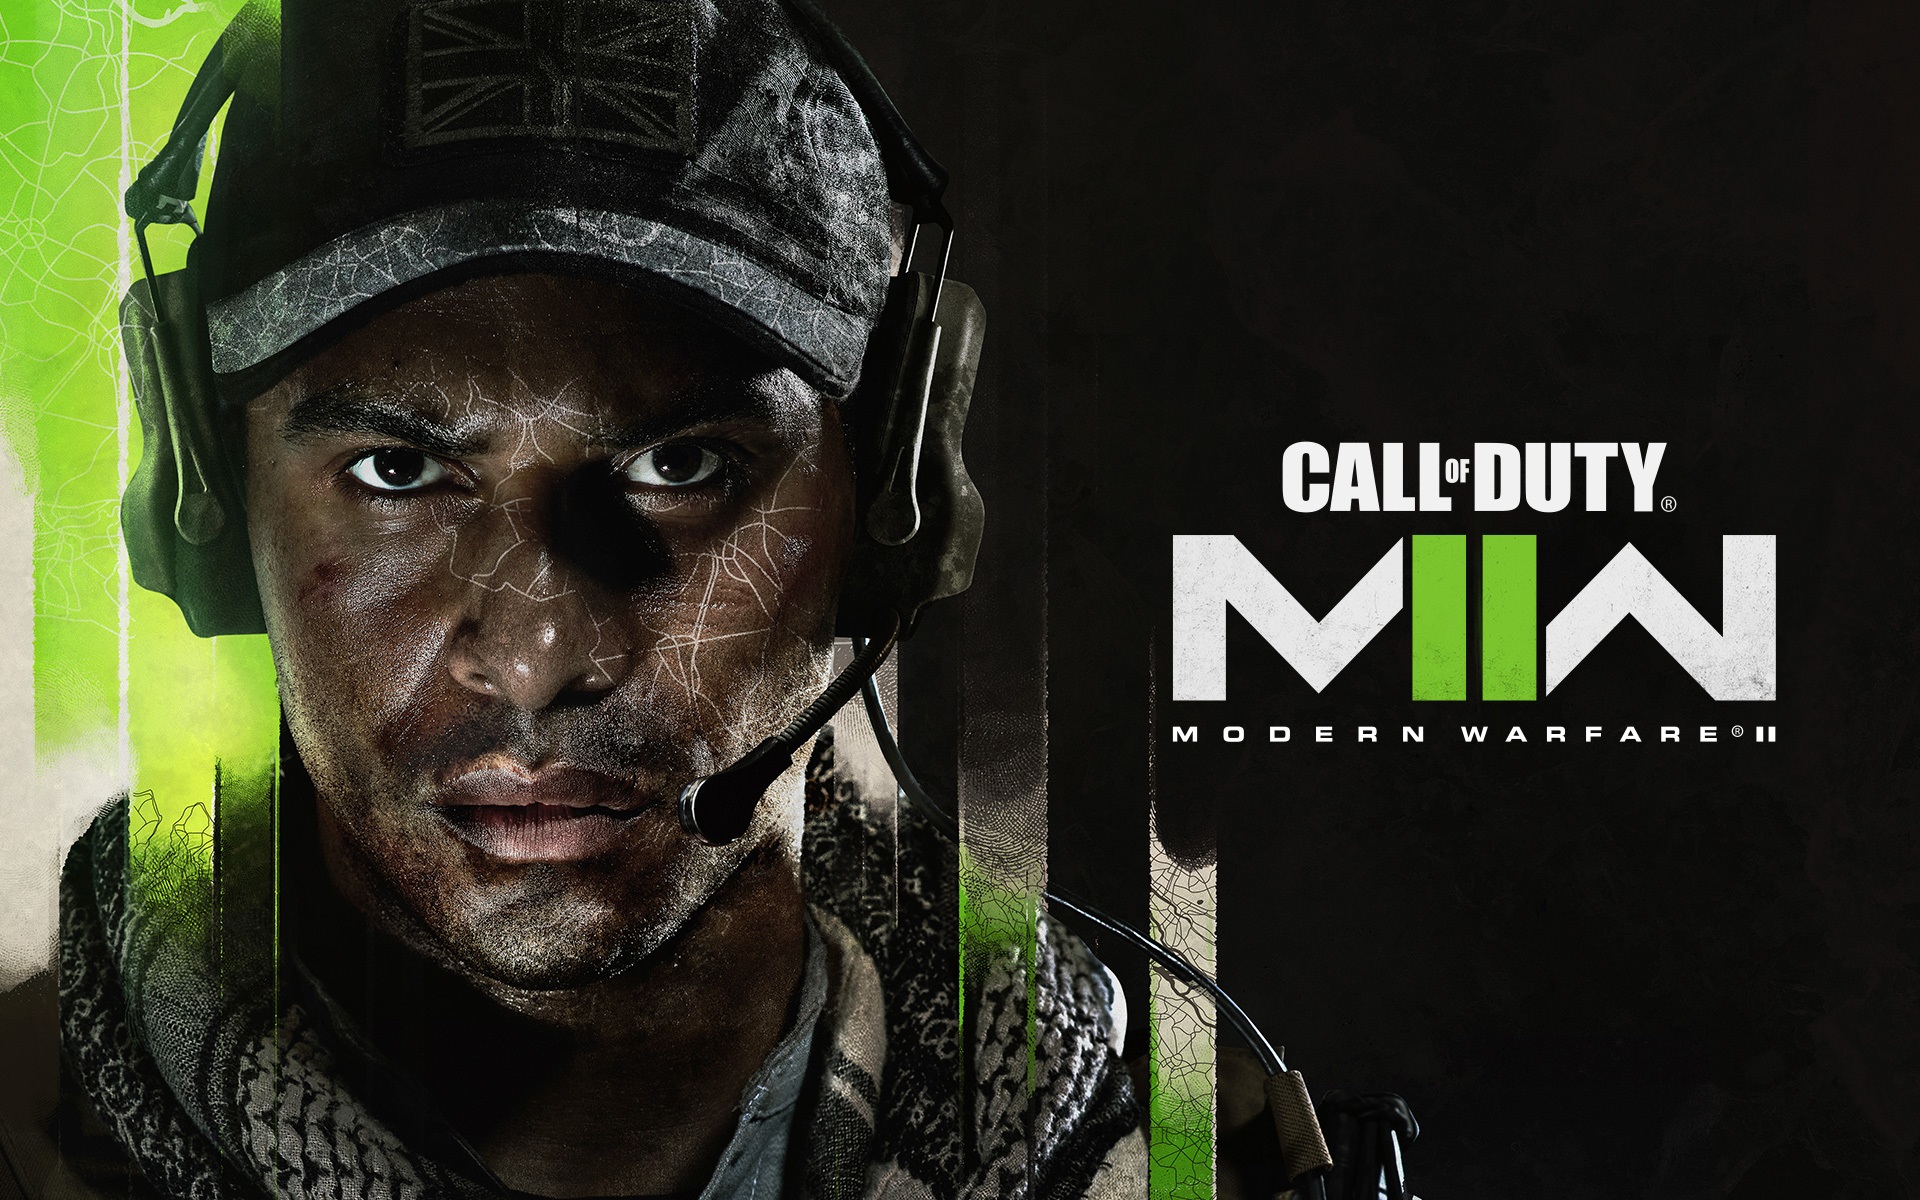 Call of Duty Modern Warfare 2 release date, trailers, and more